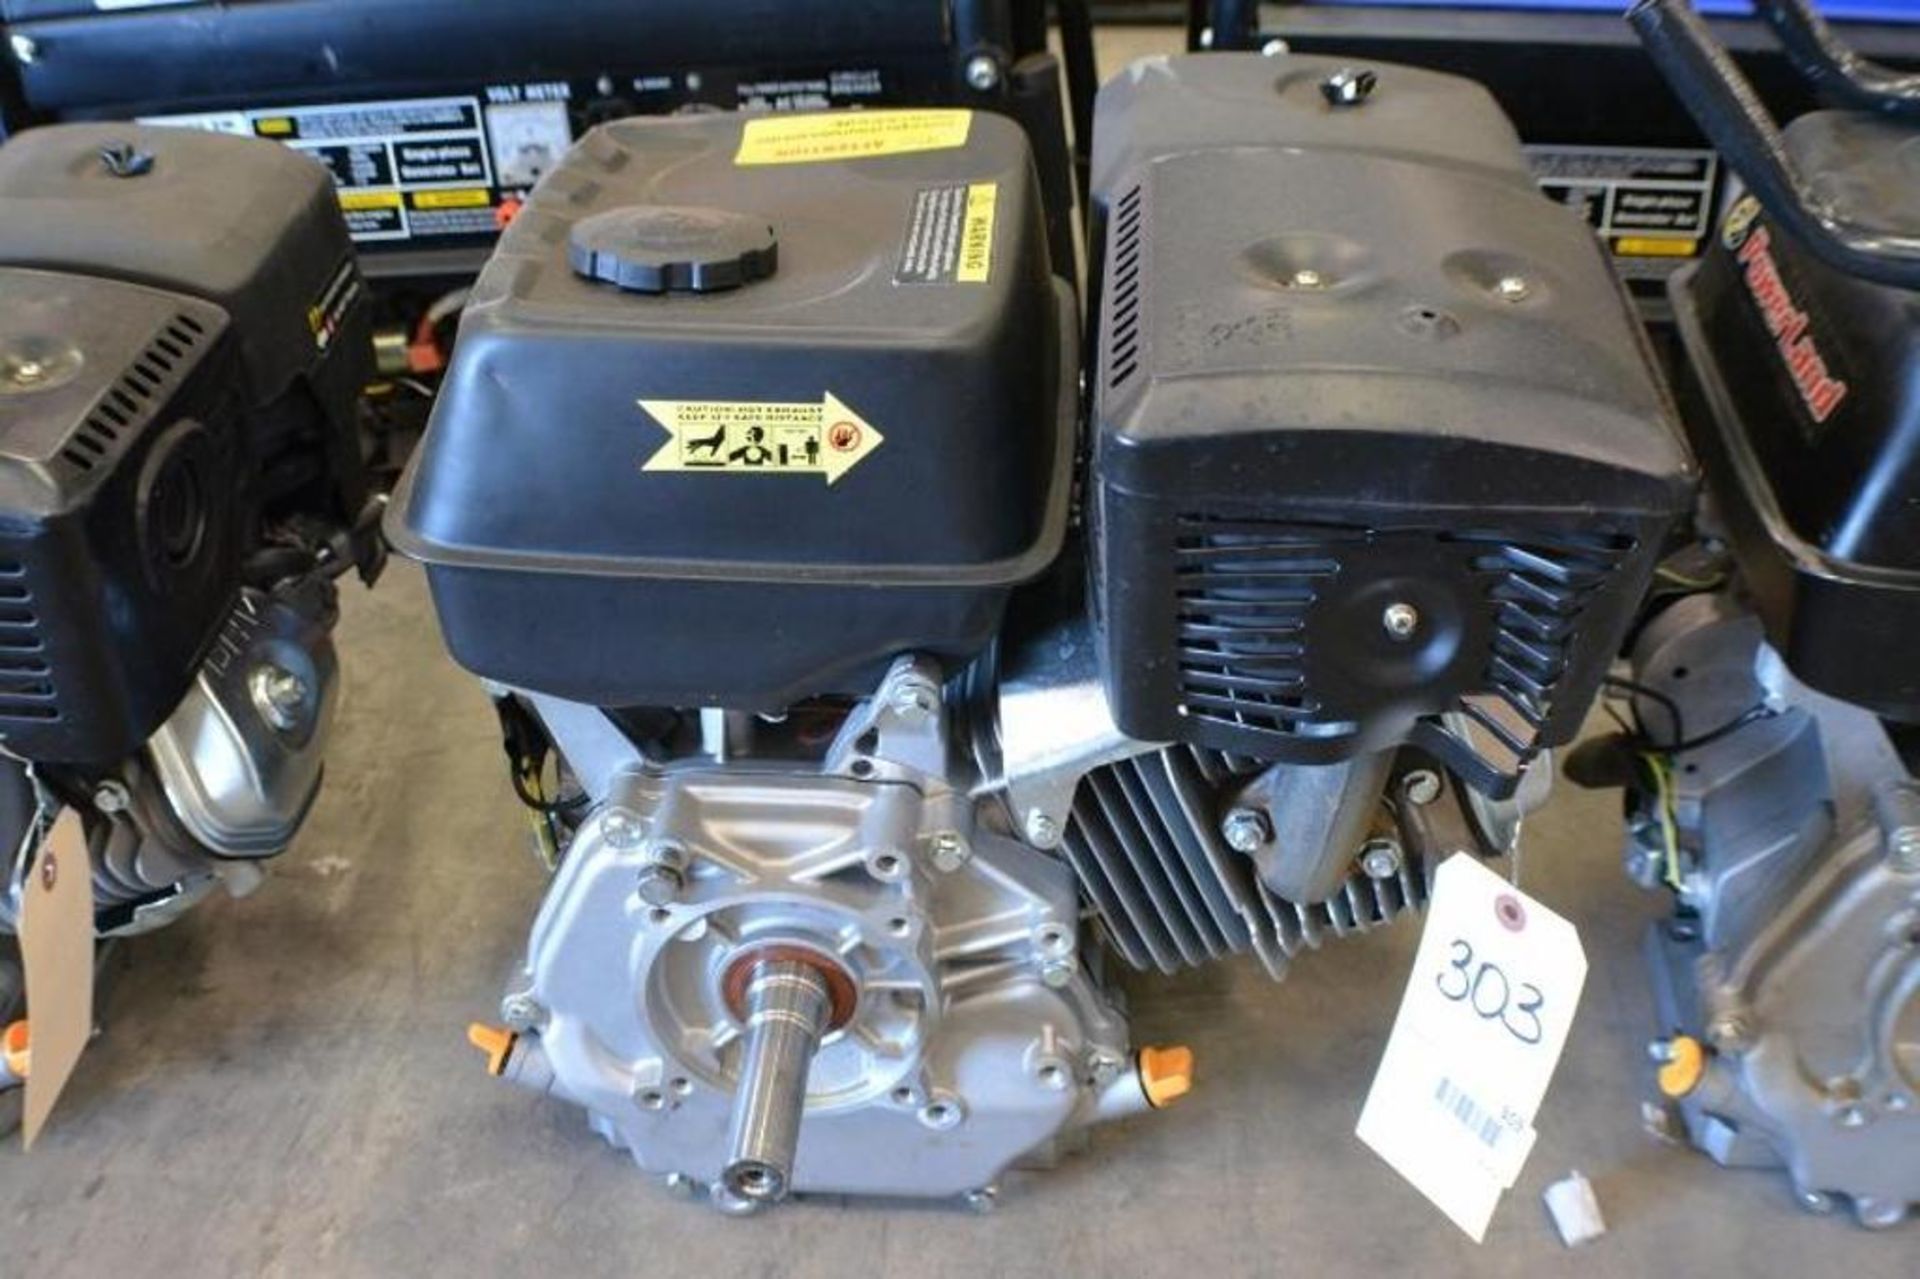 16.0 HP Gasoline Engine 4 Stroke by Powerland Model PD420